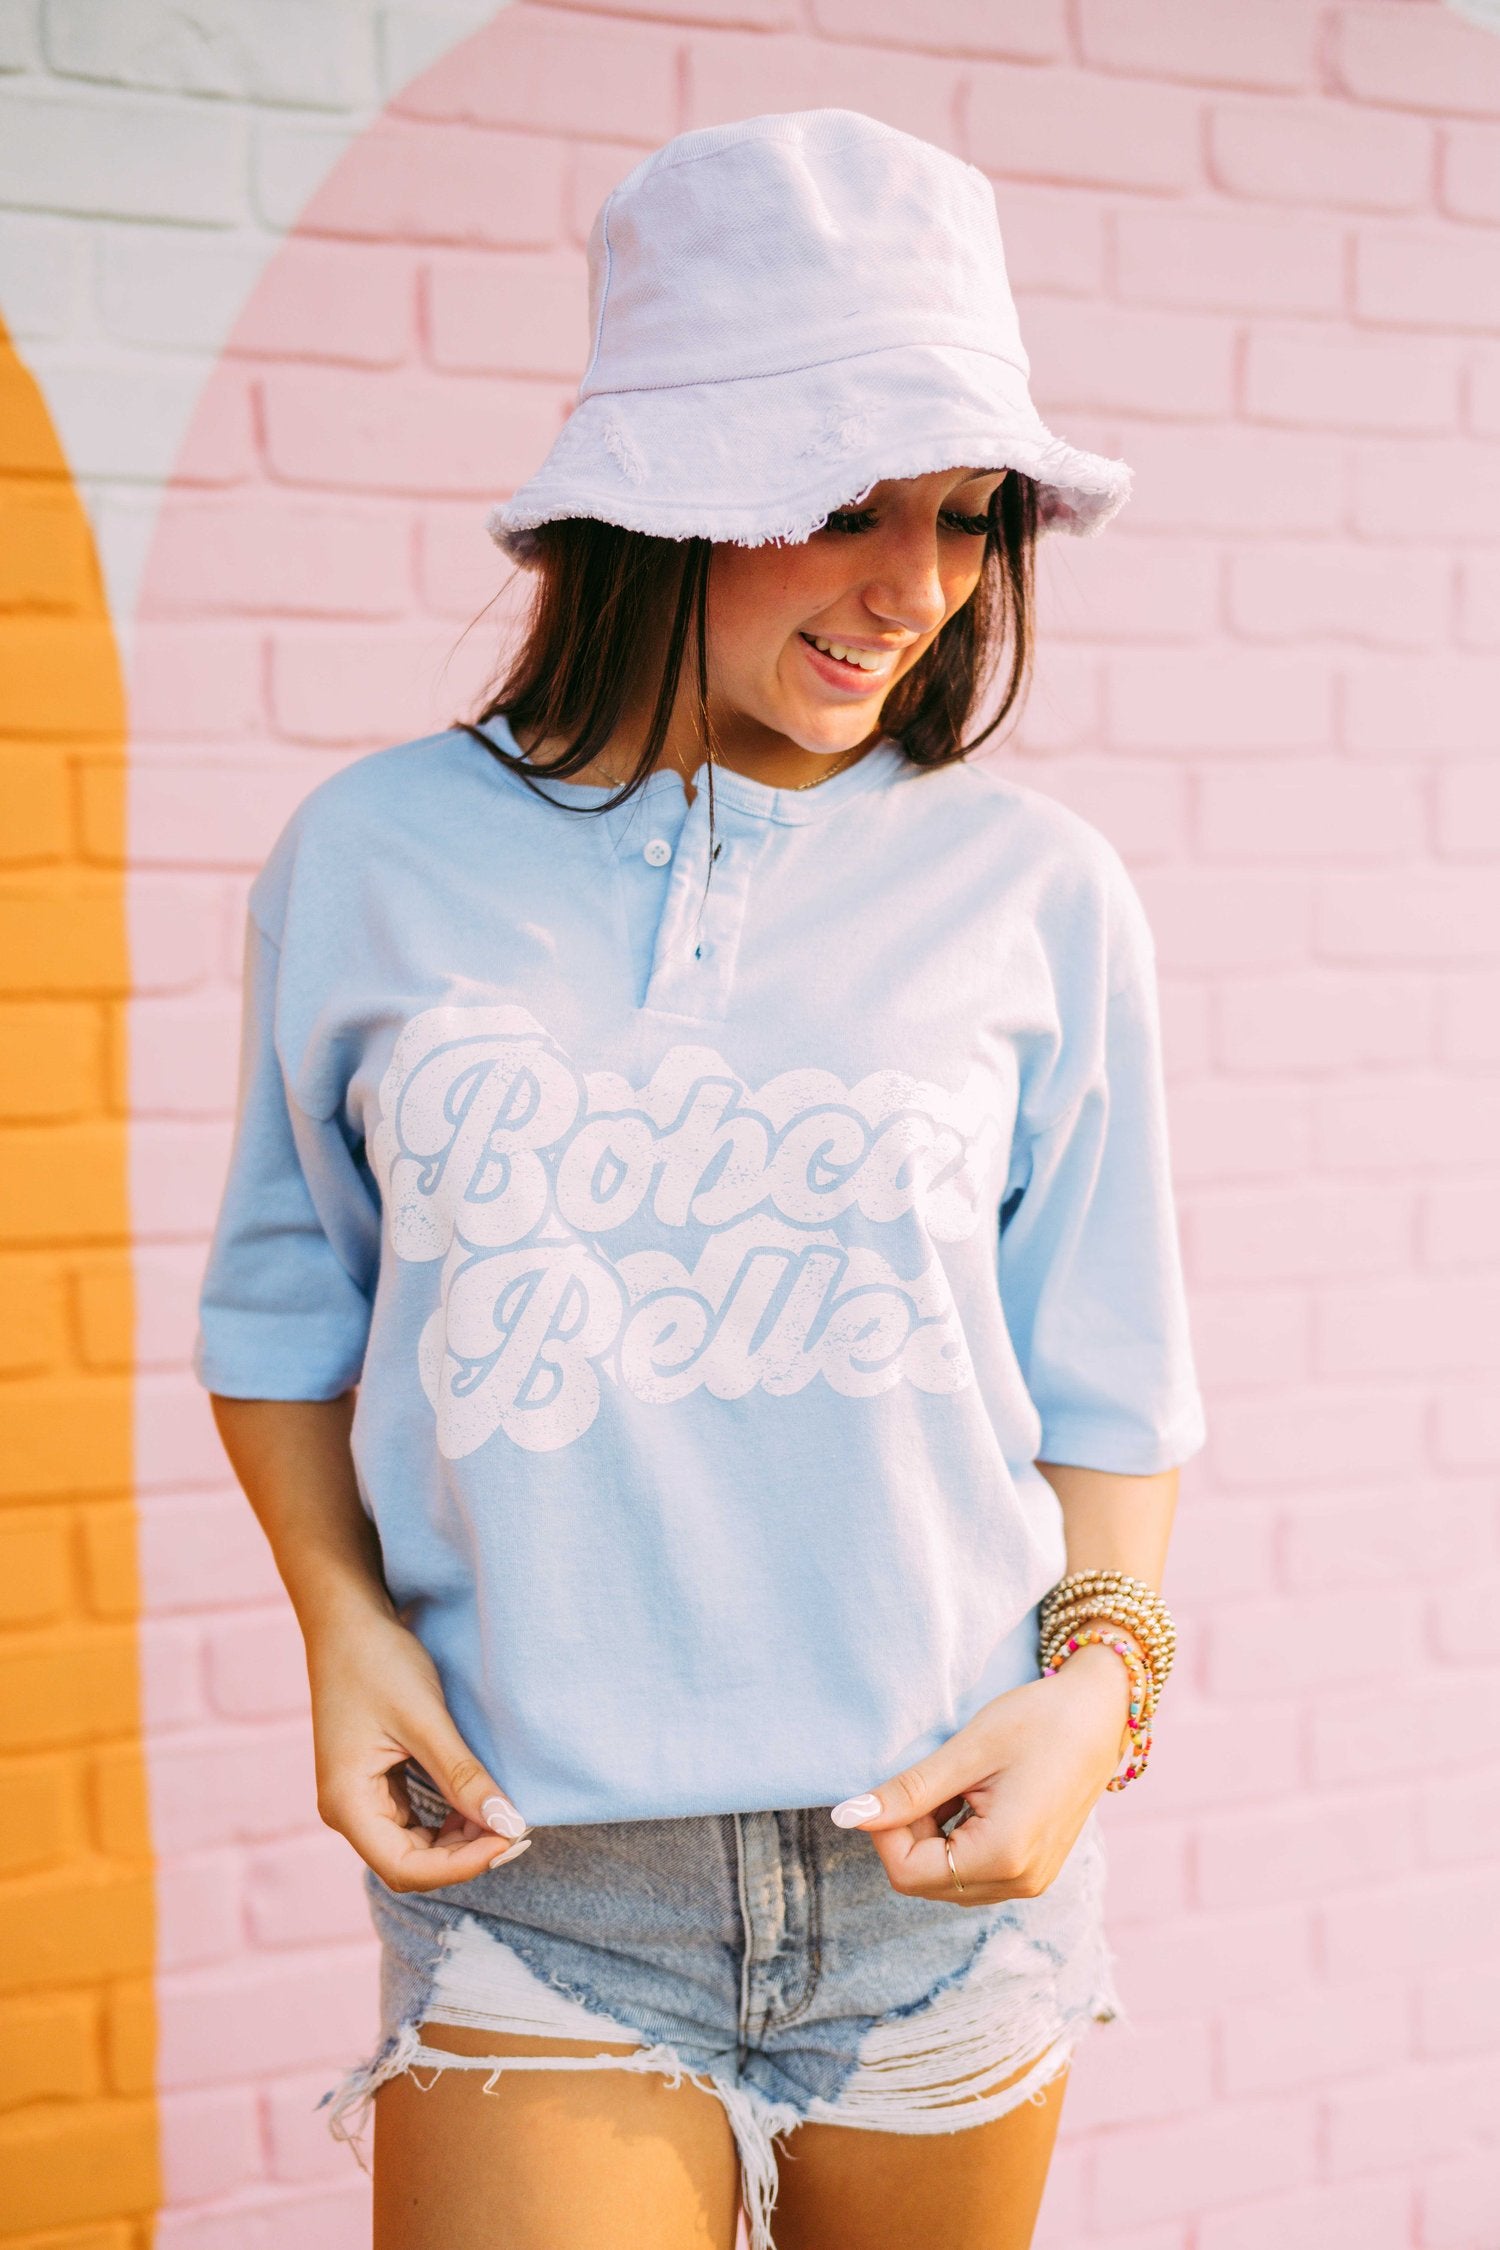 Girl stands in front of a pink wall wearing a light blue henley tshirt that reads, "Bobcat Belles."